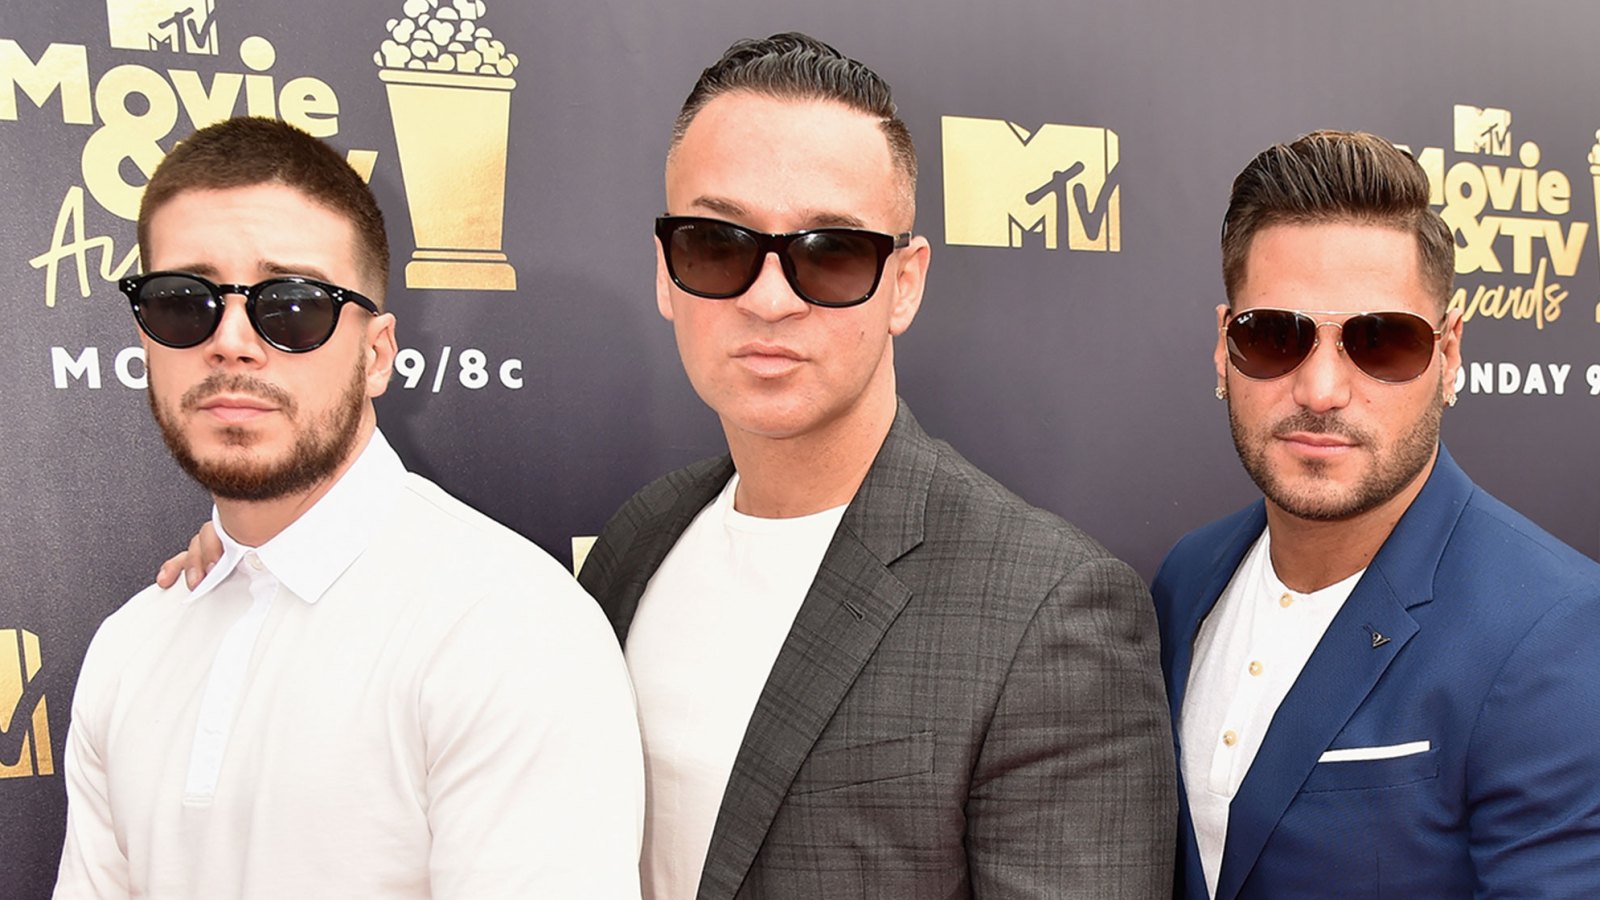 Vinny Guadagnino Opens Up About ‘Mentally Strong’ Mike ‘The Situation’ Sorrentino and Ronnie Ortiz-Magro’s Drama